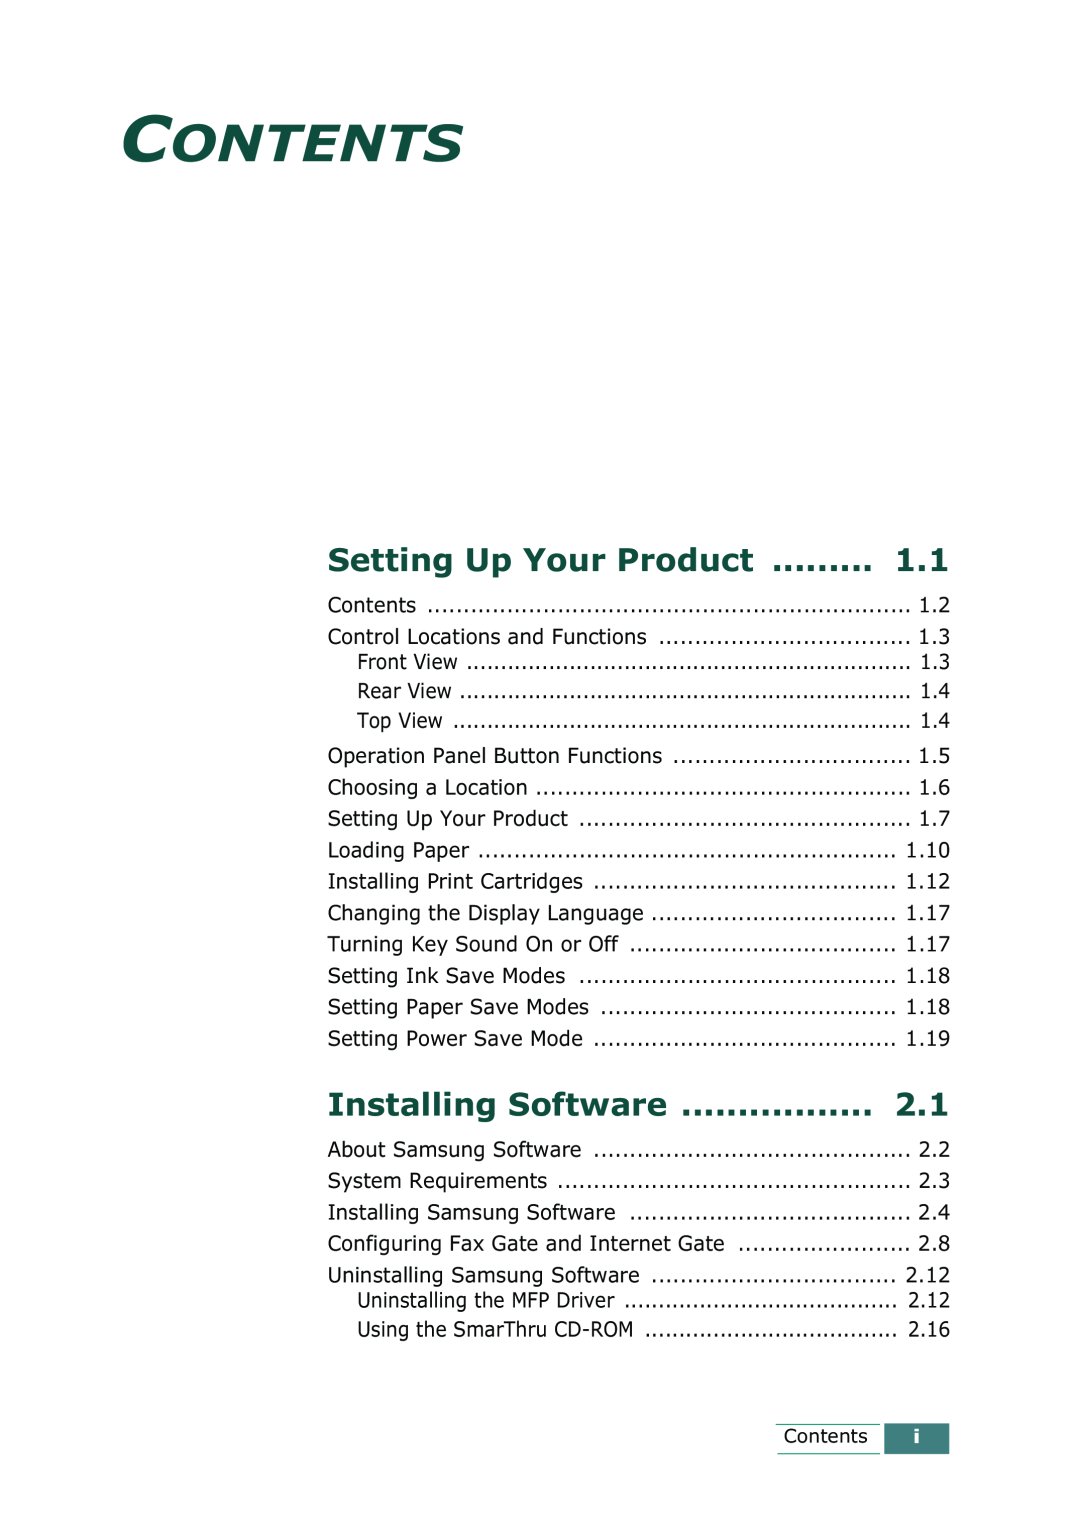 Samsung SCX-1100 manual Contents, Setting Up Your Product, Installing Software 